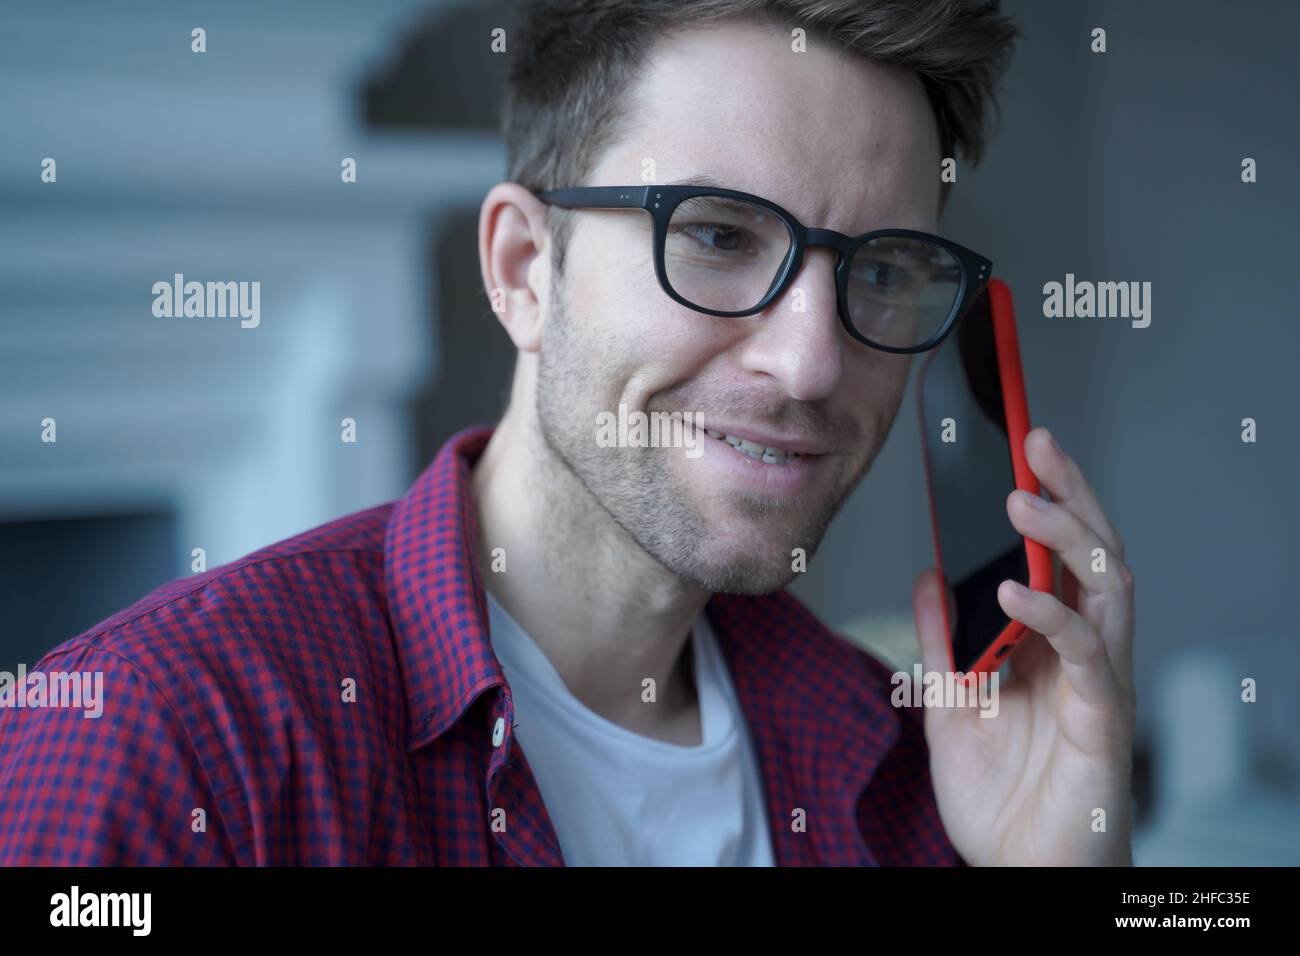 Young smiling german guy in glasses using mobile phone and talking on with friend Stock Photo